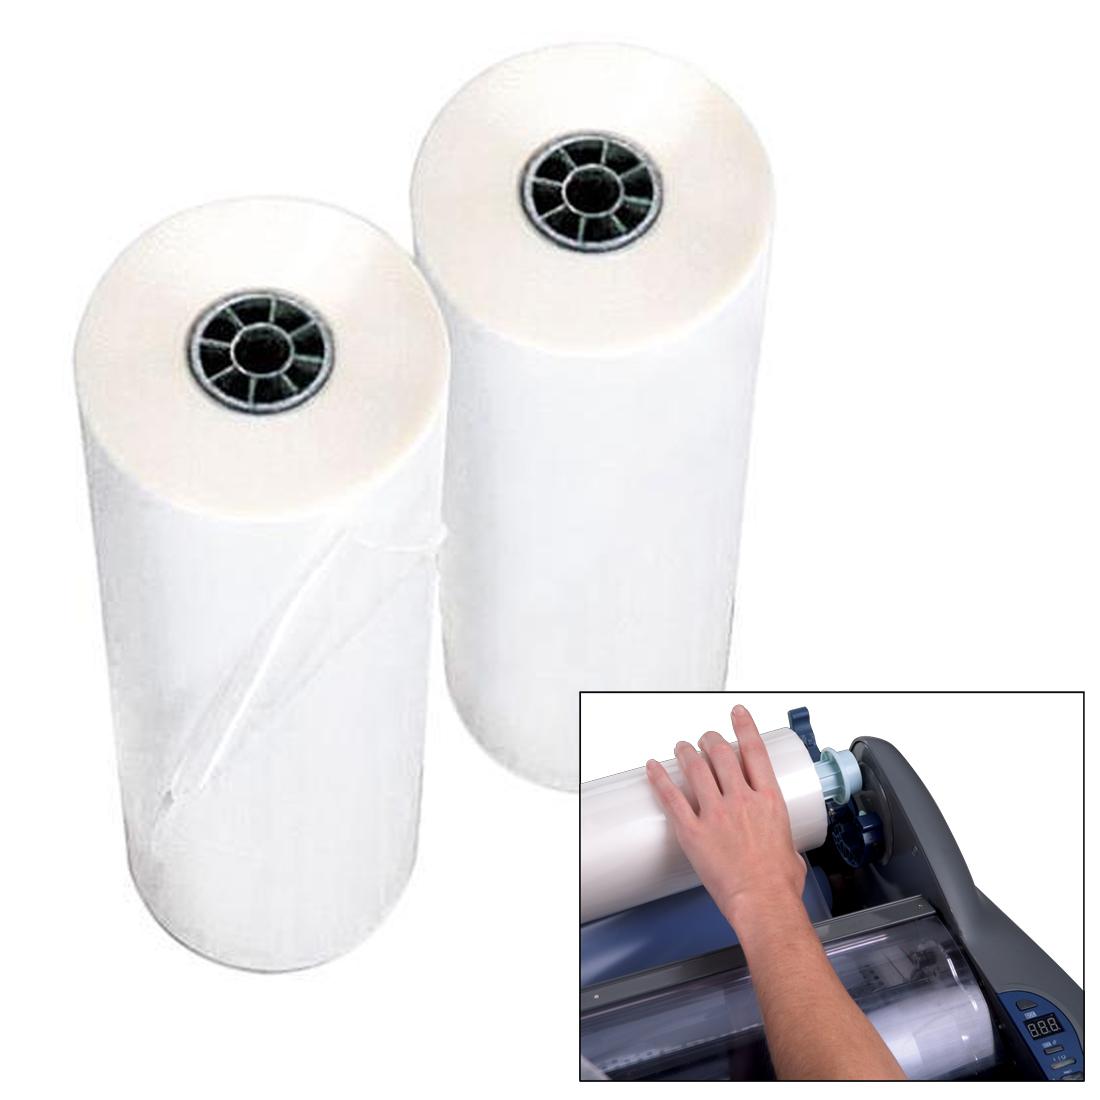 Two rolls of EZload Laminating Film with inset picture of a hand loading a roll into a laminator